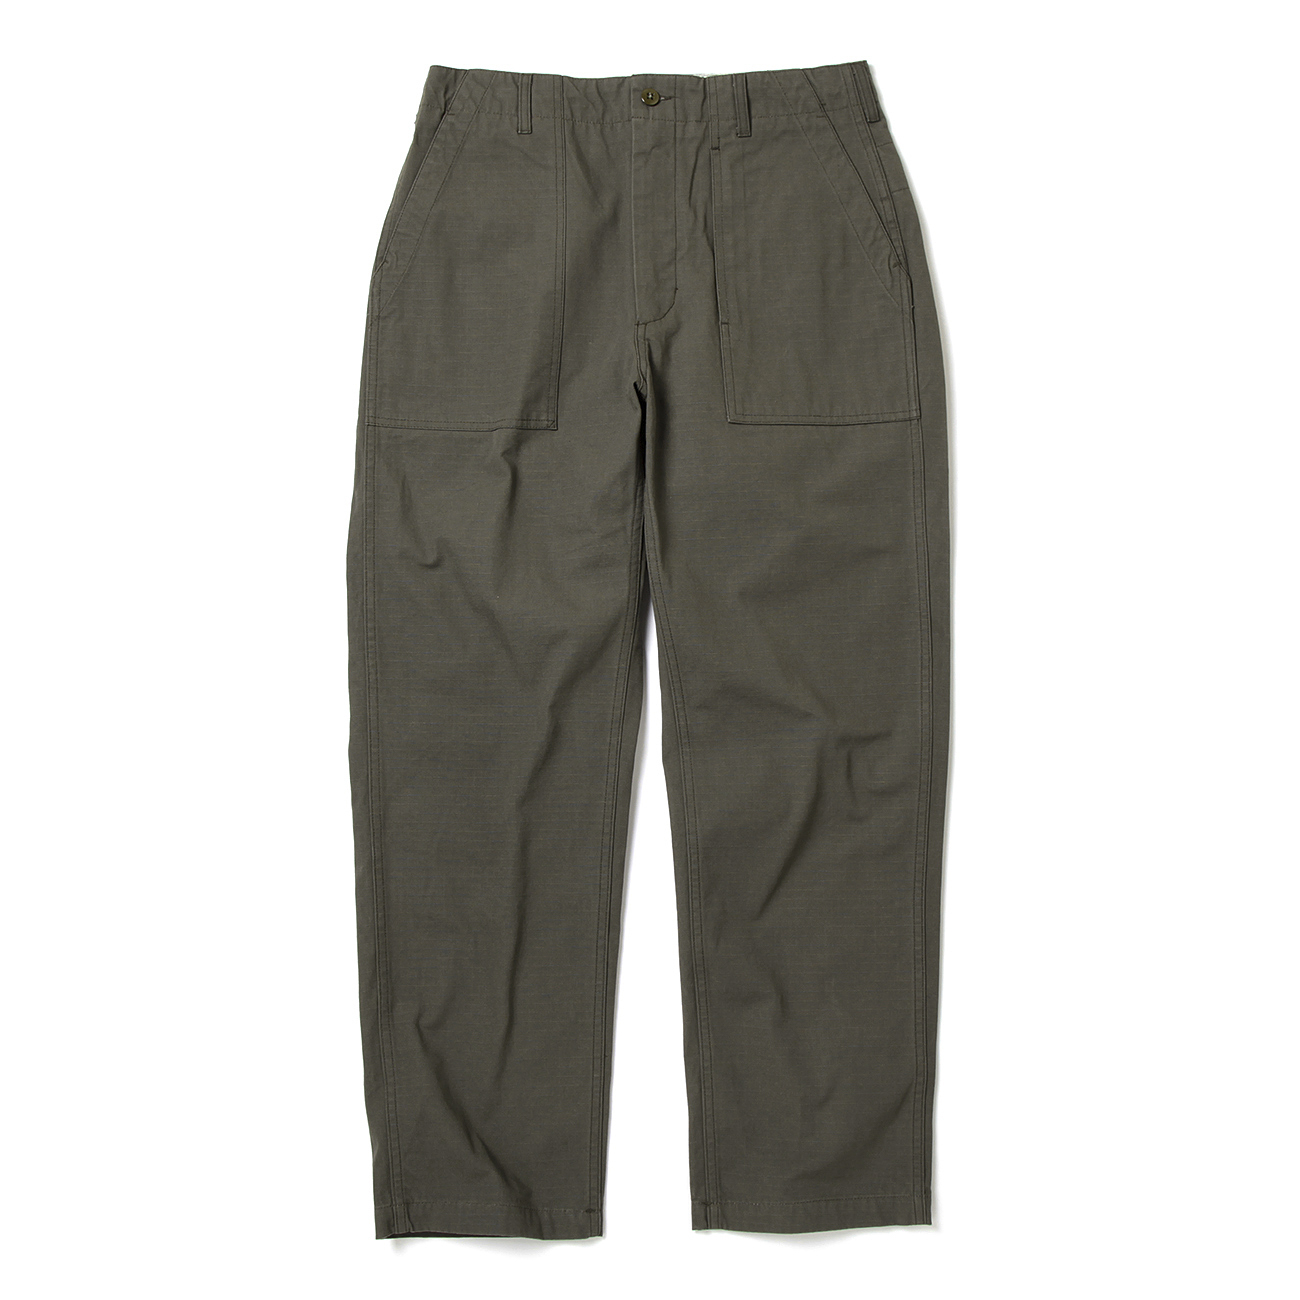 Fatigue Pant - Heavyweight Cotton Ripstop - Olive